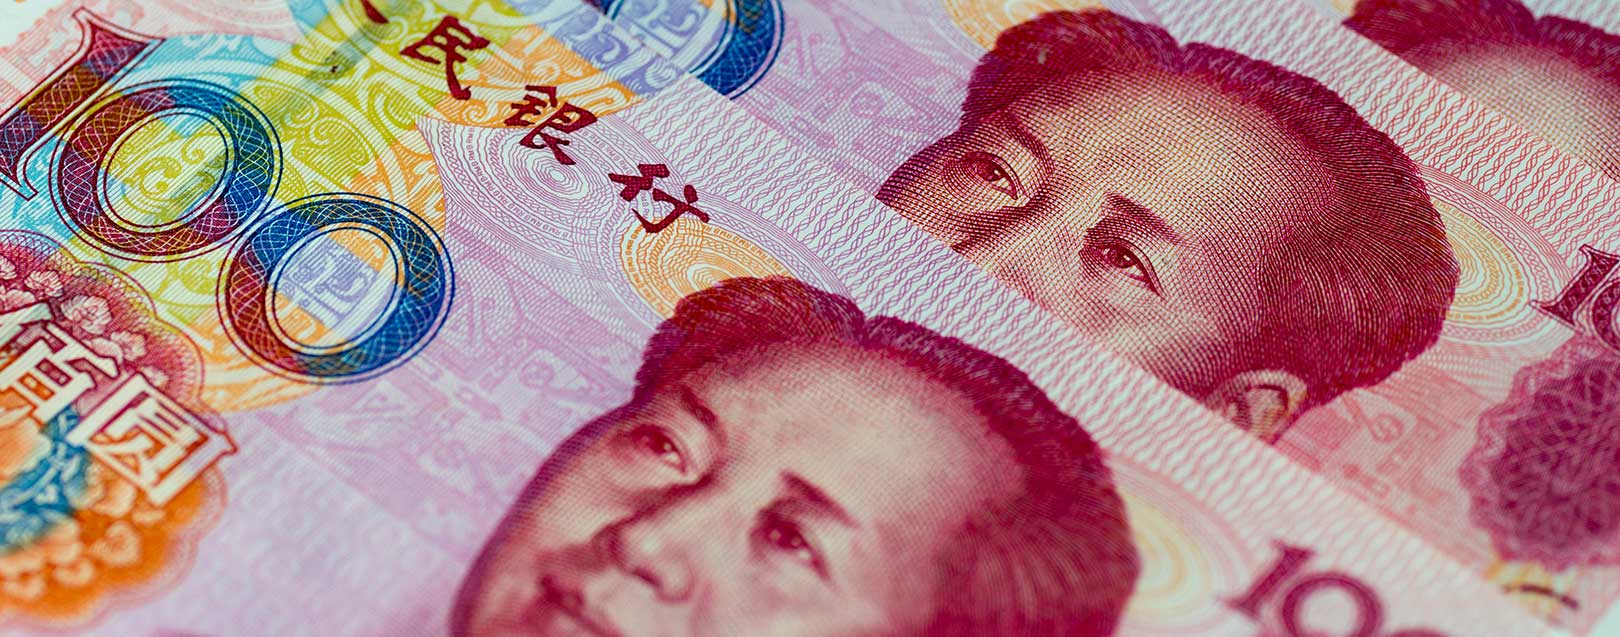 200% Chinese credit growth in less than 10 years is dangerous: IMF